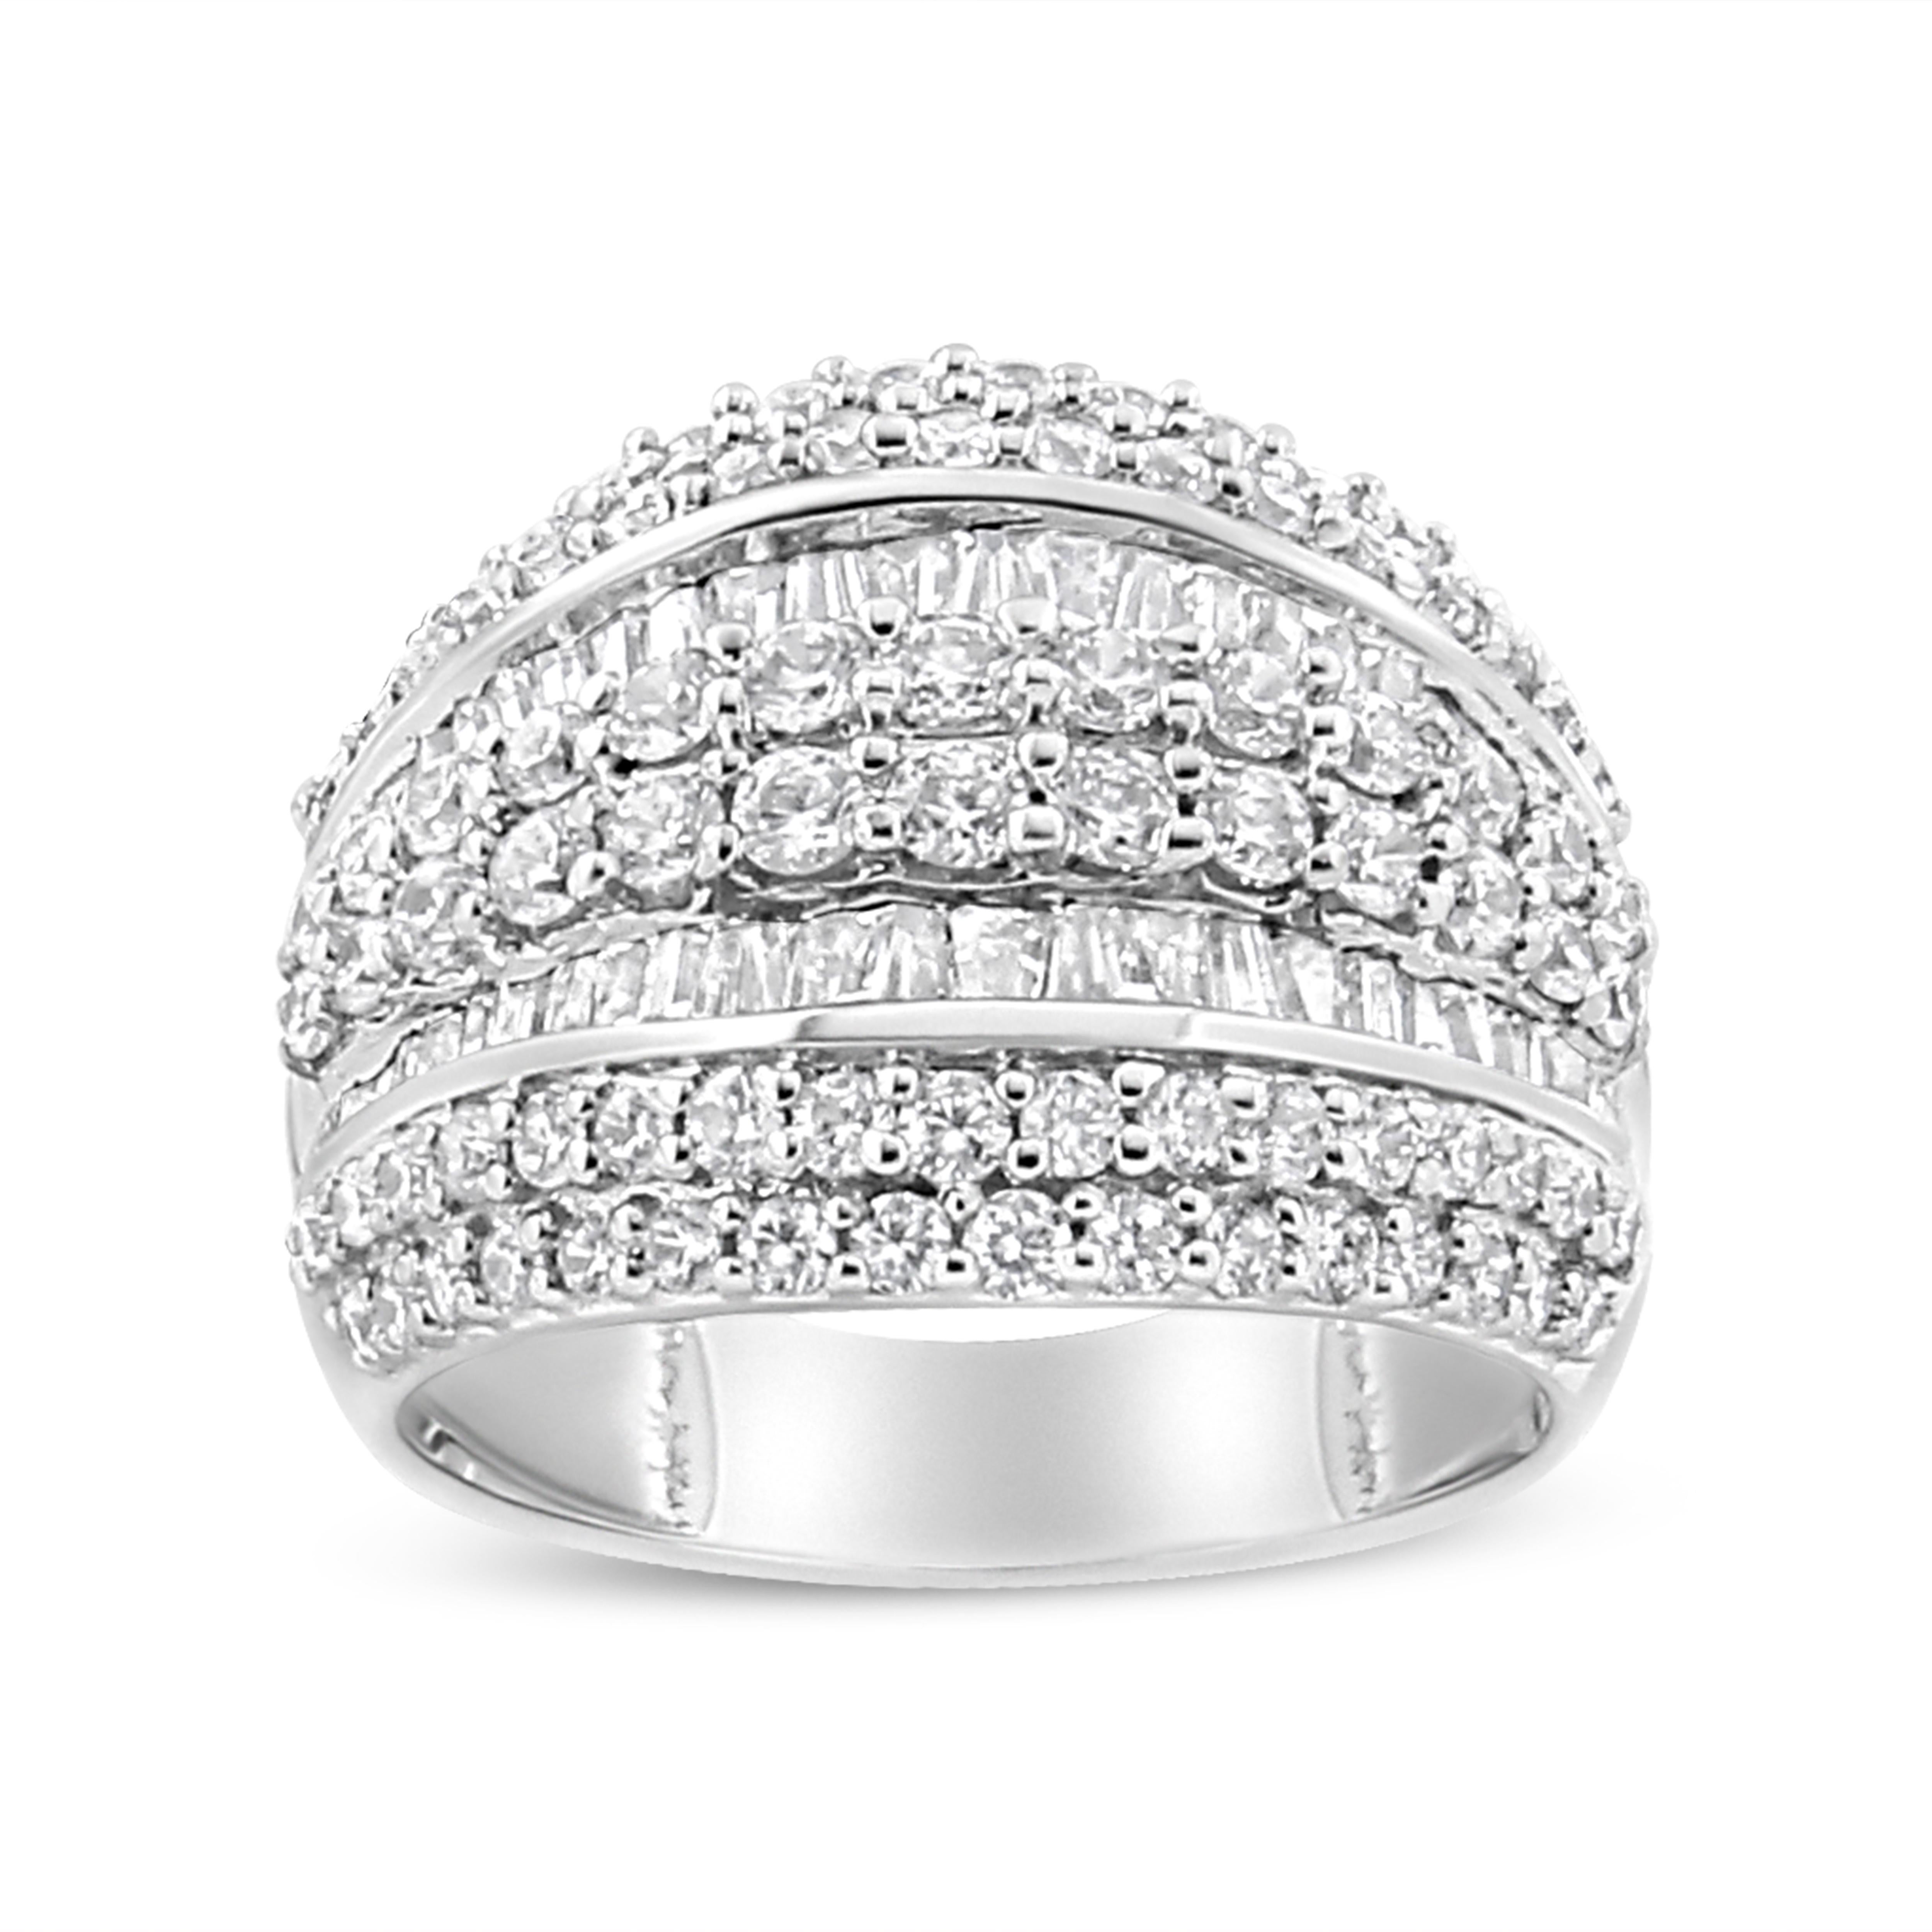 For Sale:  .925 Sterling Silver 2.0 Carat Round and Baguette-Cut Diamond Cluster Ring 2